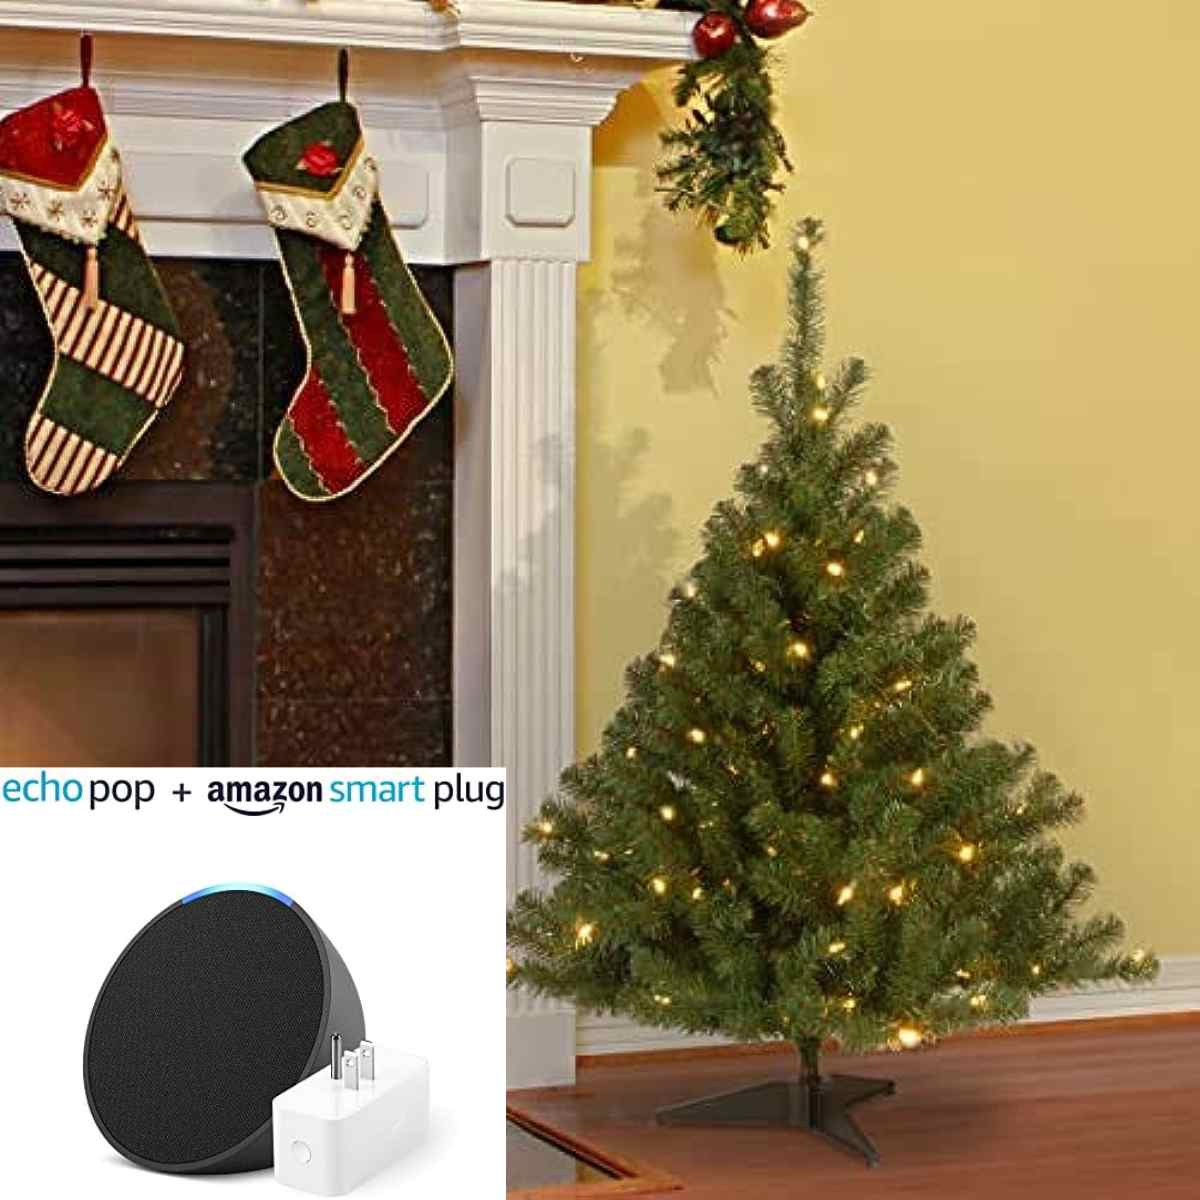 Get a free  Smart Plug and Echo Pop when you buy a Christmas tre